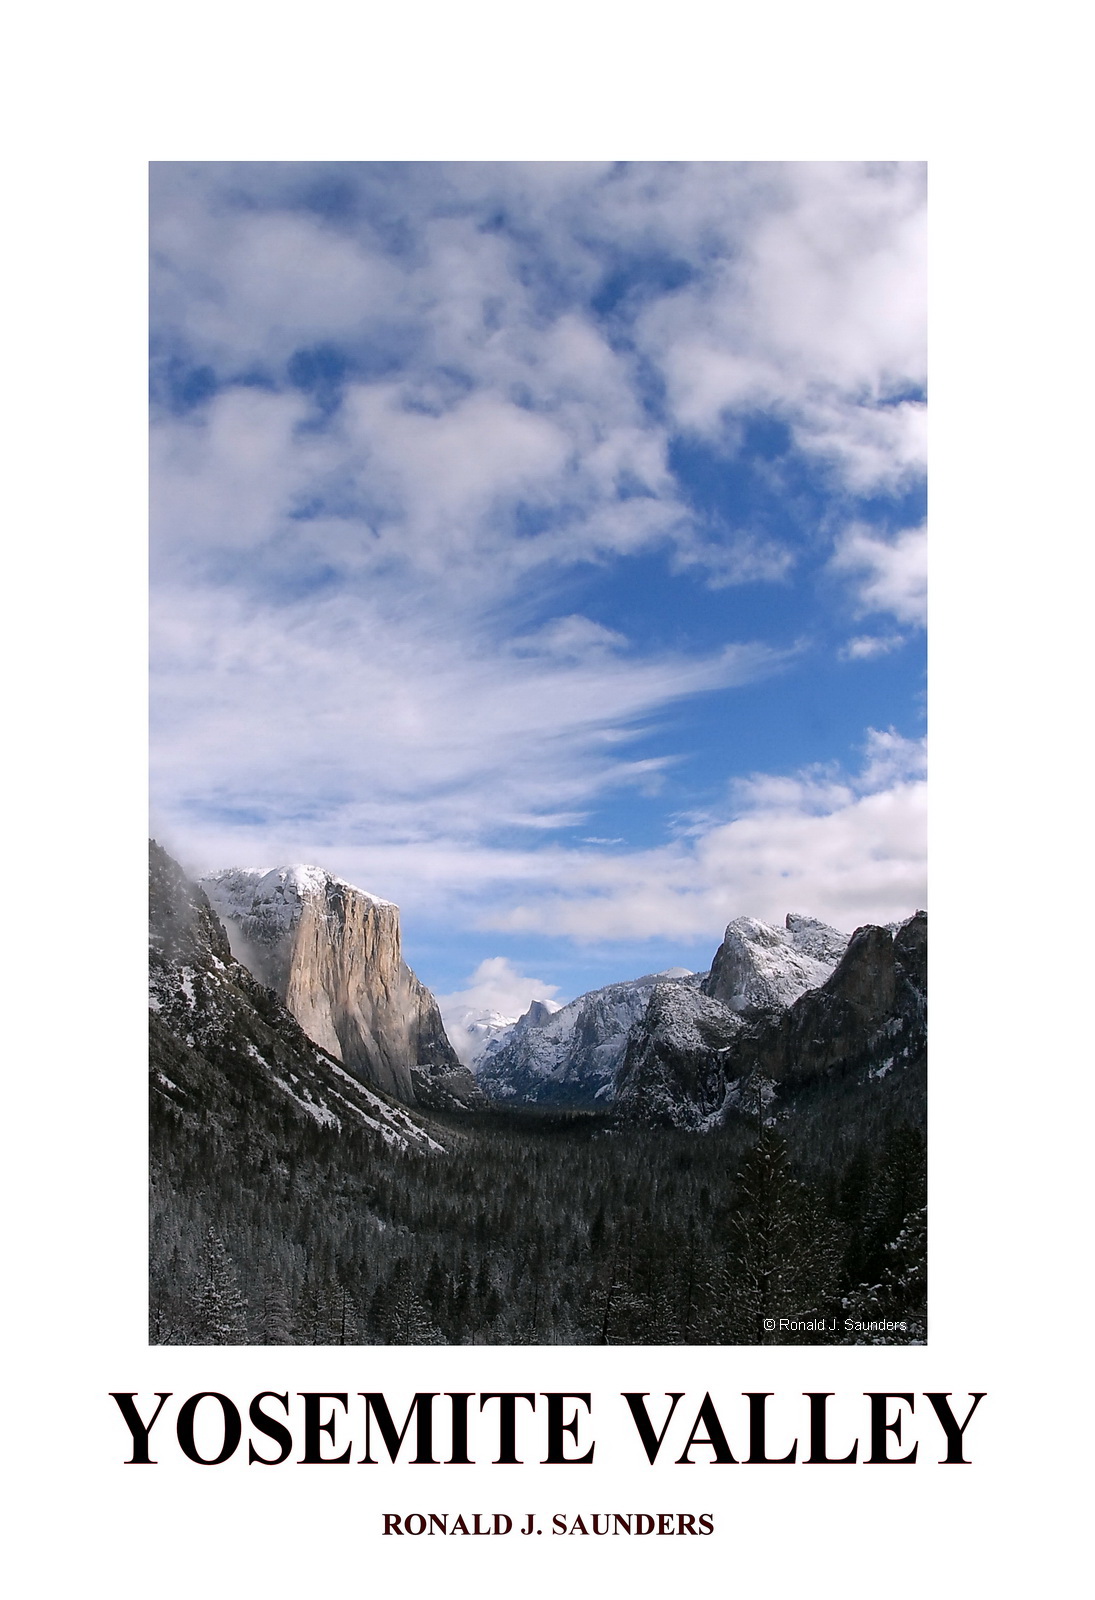 Here is a beatiful print of Yosemite Valley taken from Tunnel View.&nbsp;The cloud formations and the light dusting of snow compliment...